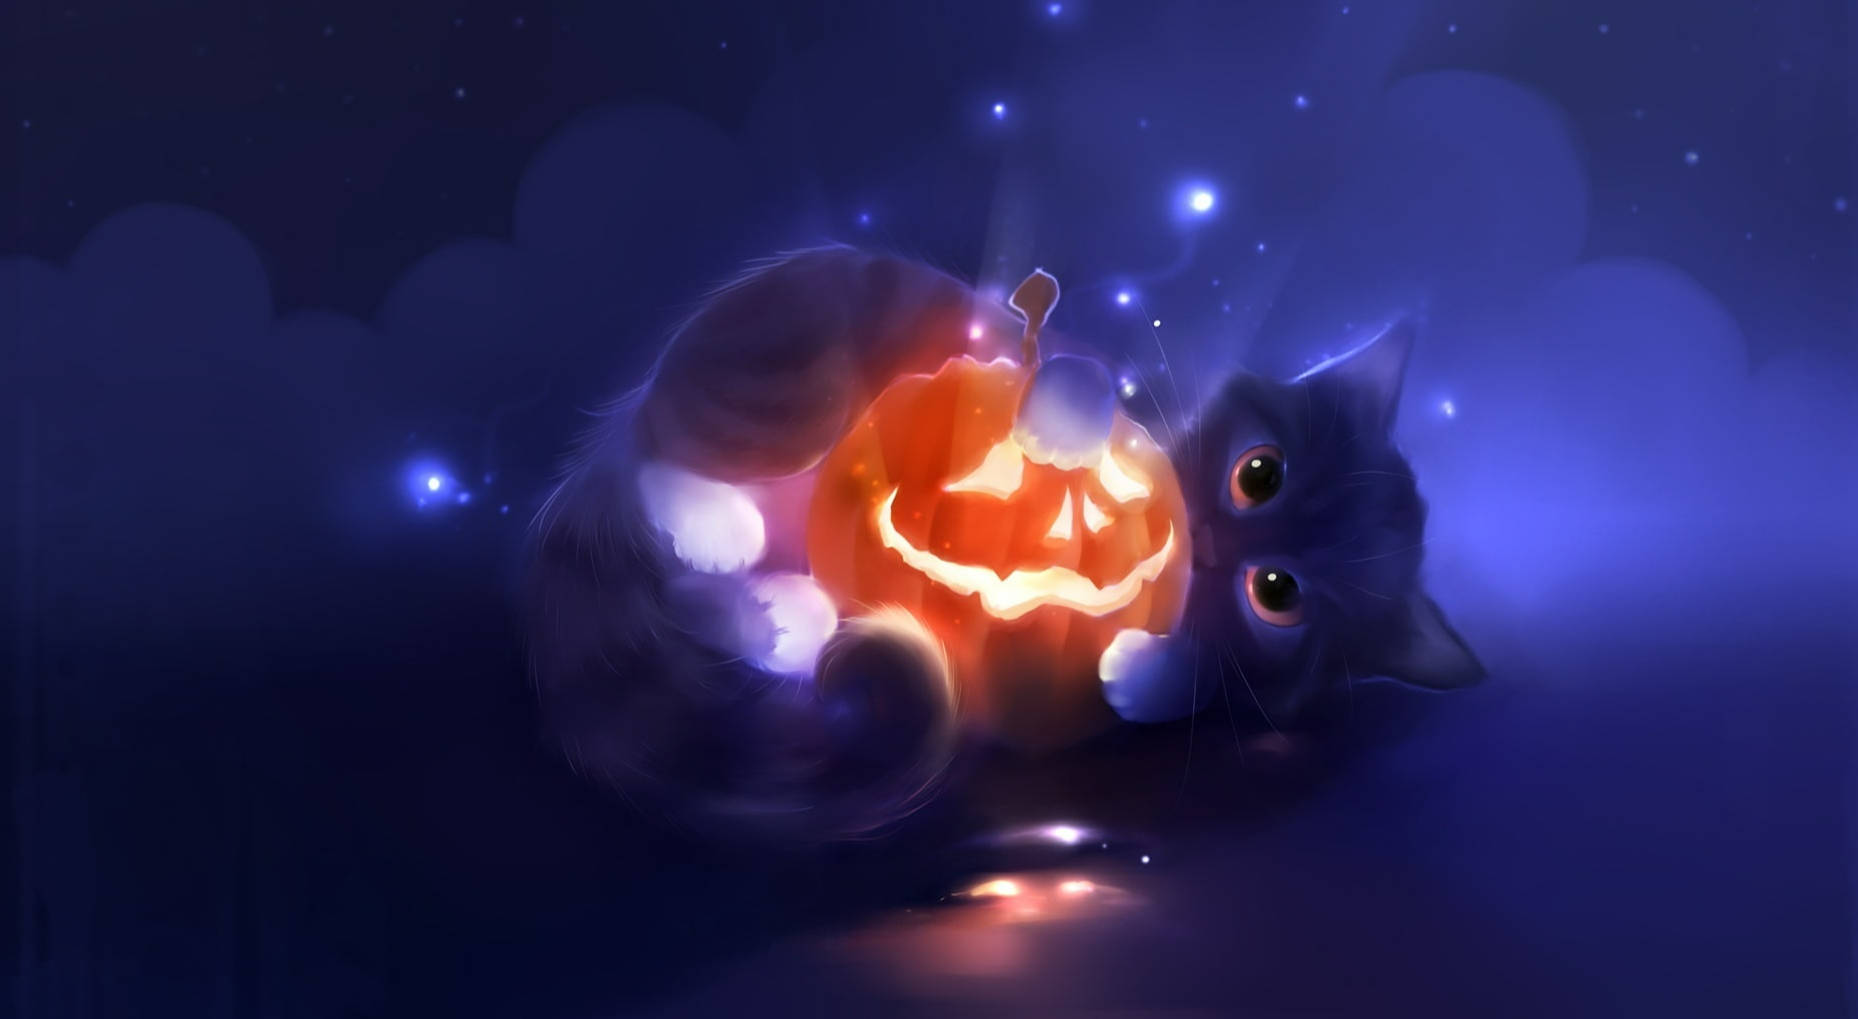 Cute Halloween Cat With Jack O' Lantern Background